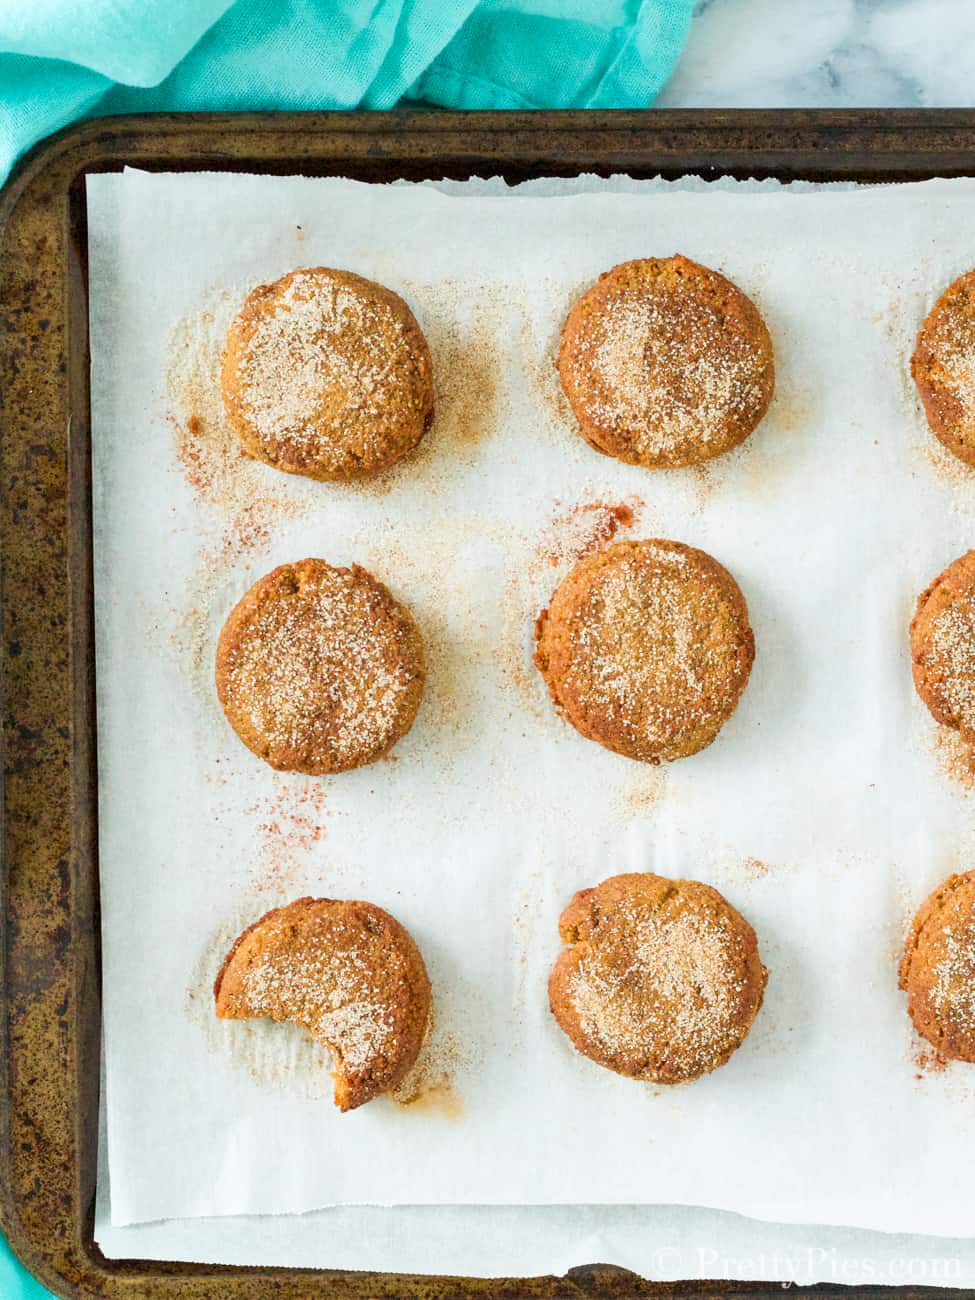 Baked snickerdoodle cookies on a cookie sheet